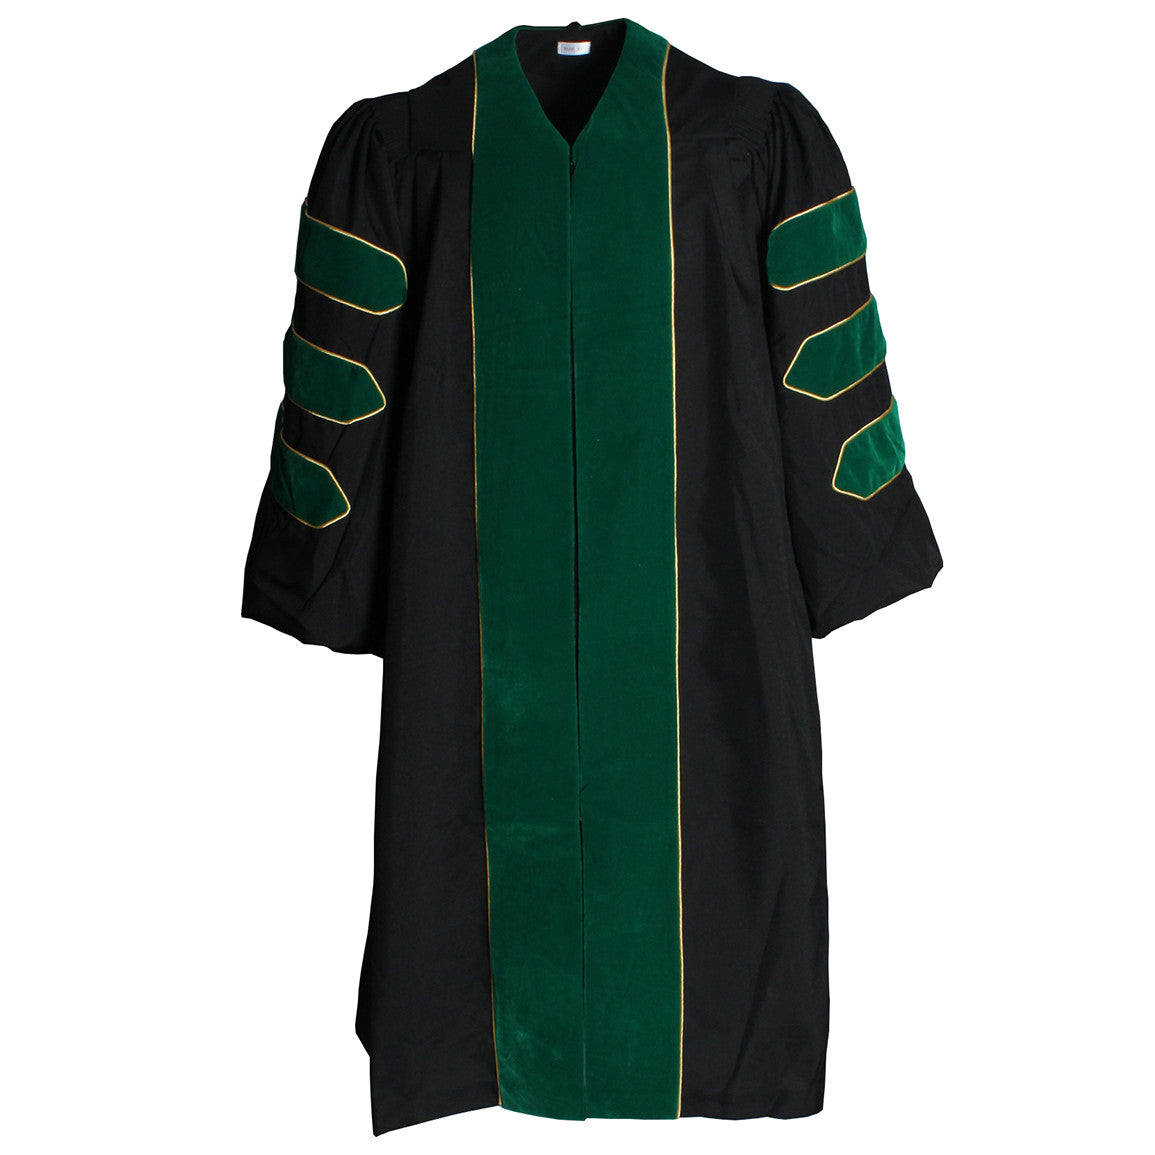 Deluxe Emerald/Hunter Green Doctoral Gown with Gold Piping